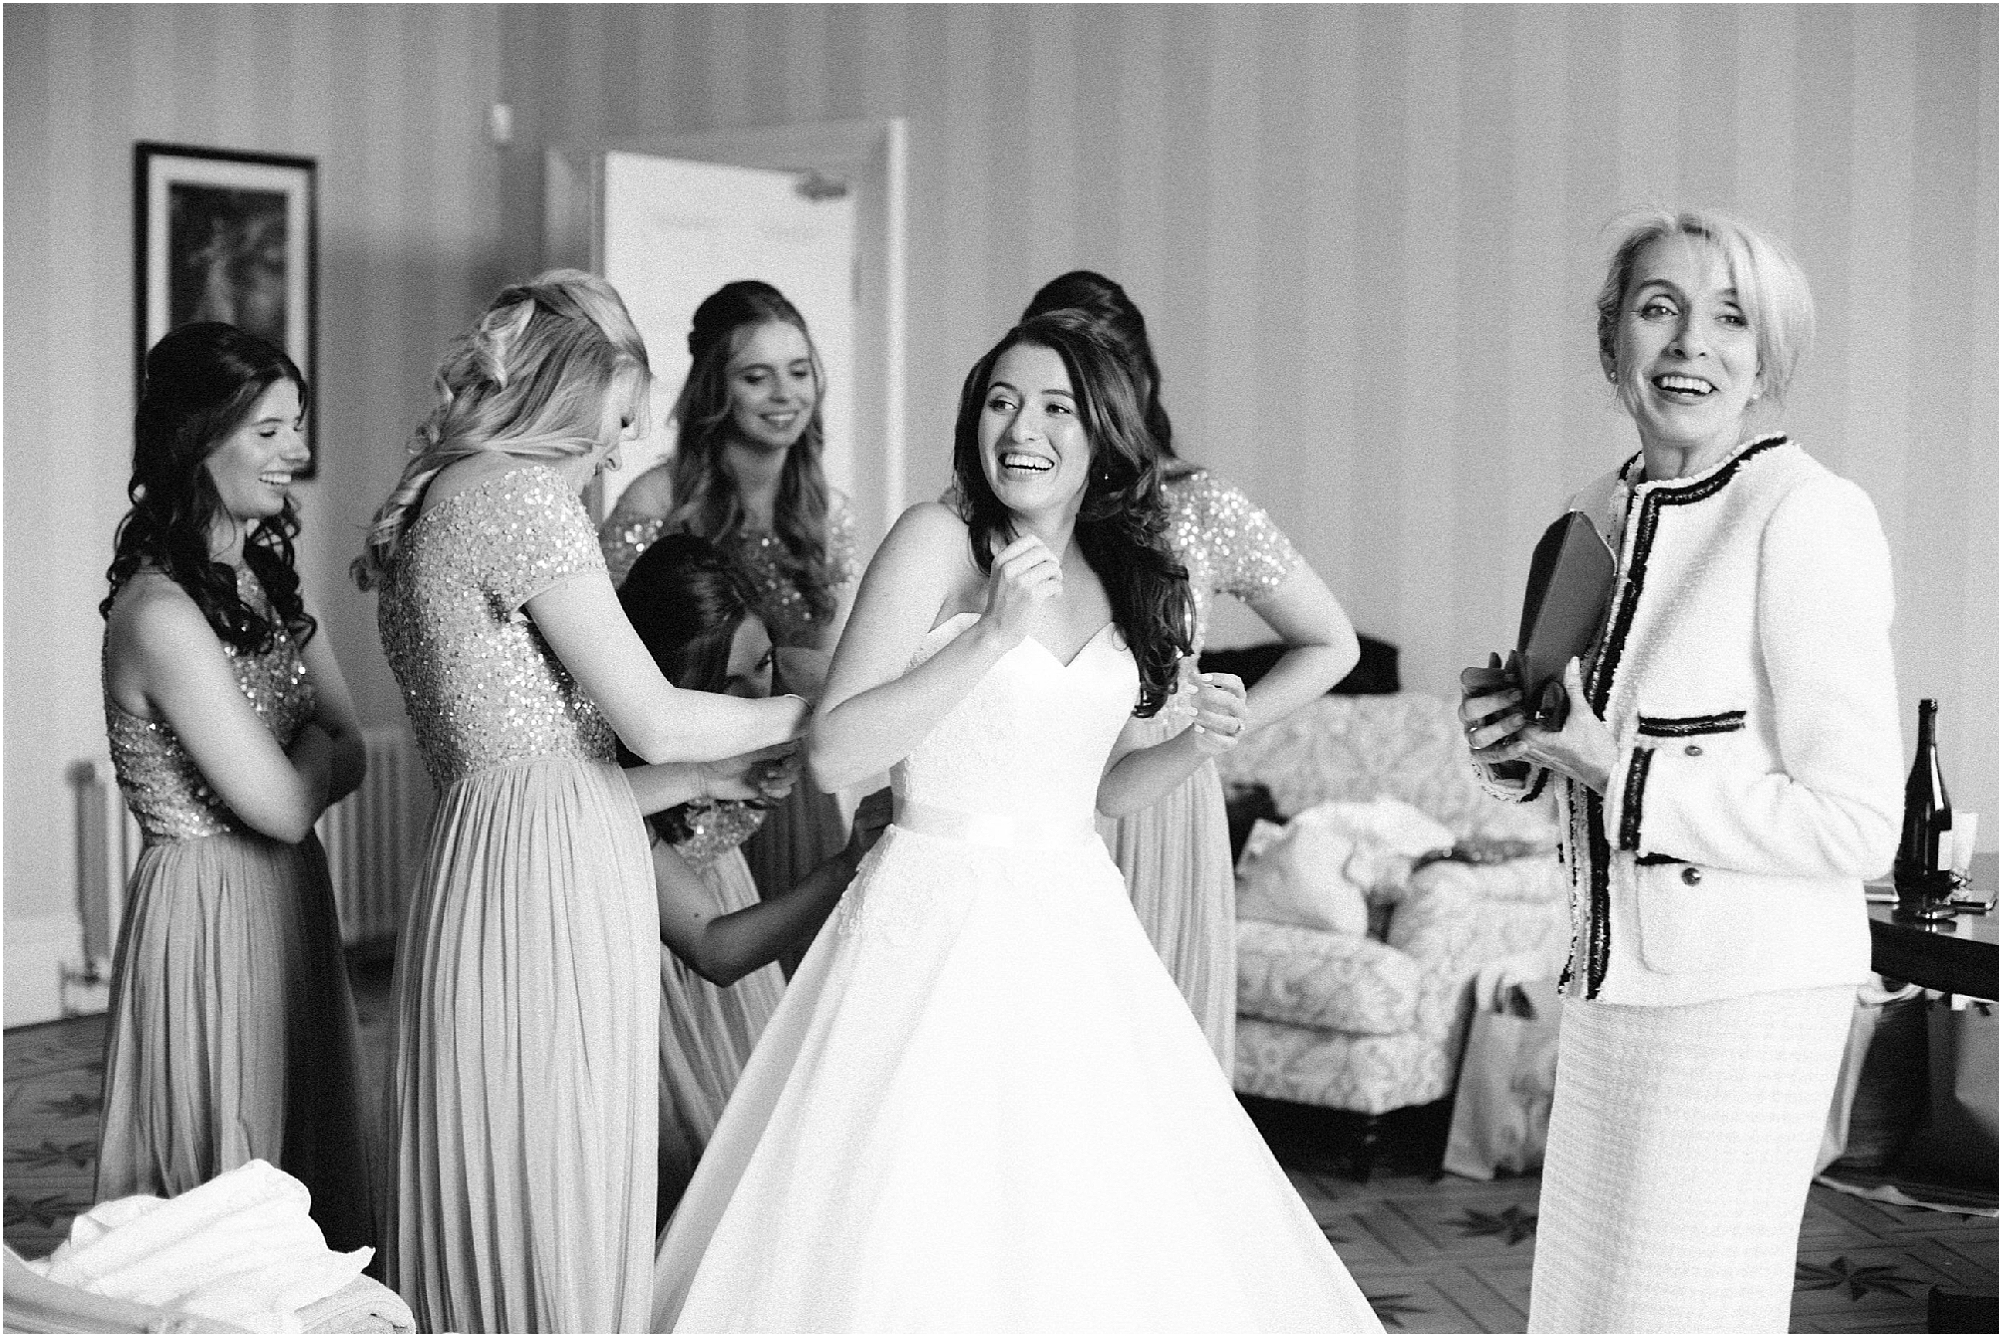 Bride with mother and bridesmaids putting on wedding dress in bridal suite